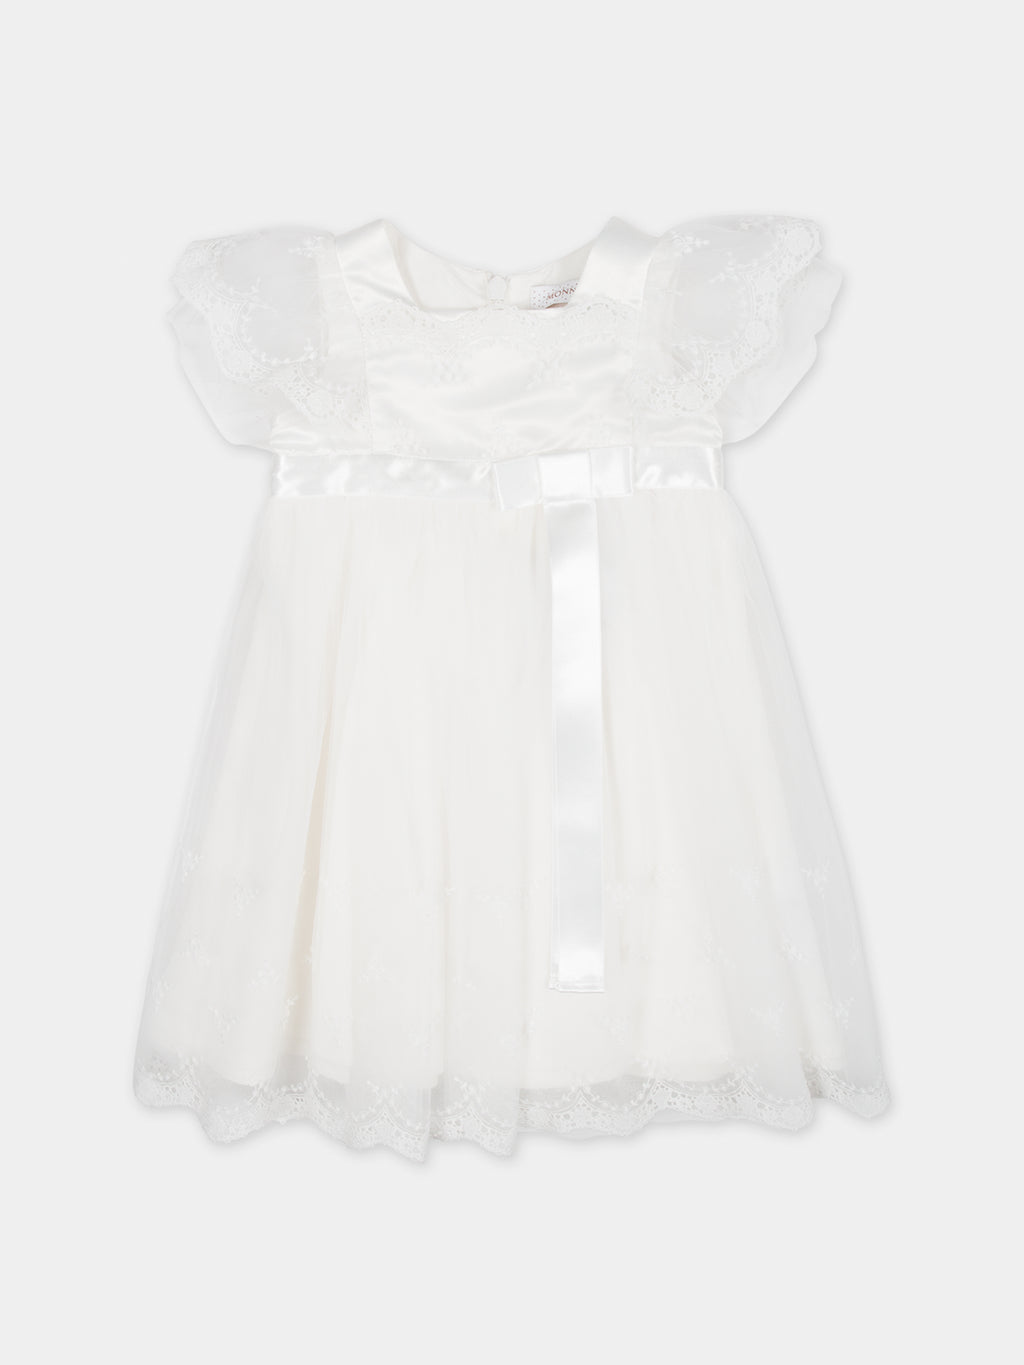 White dress for baby girl with embroidery and bow